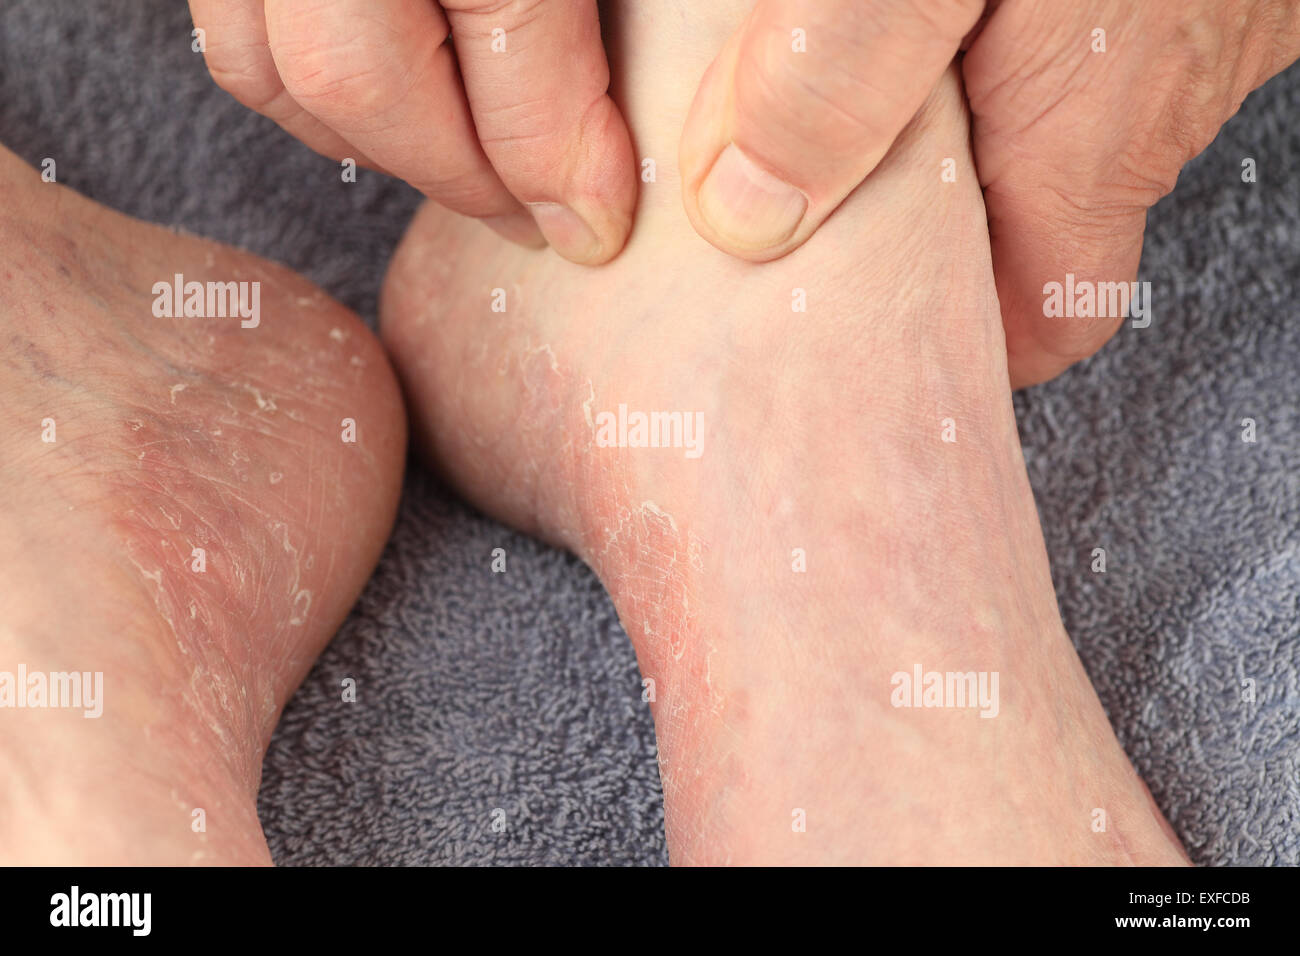 A man checks the reddened, dry skin of athletes foot on both feet. Stock Photo